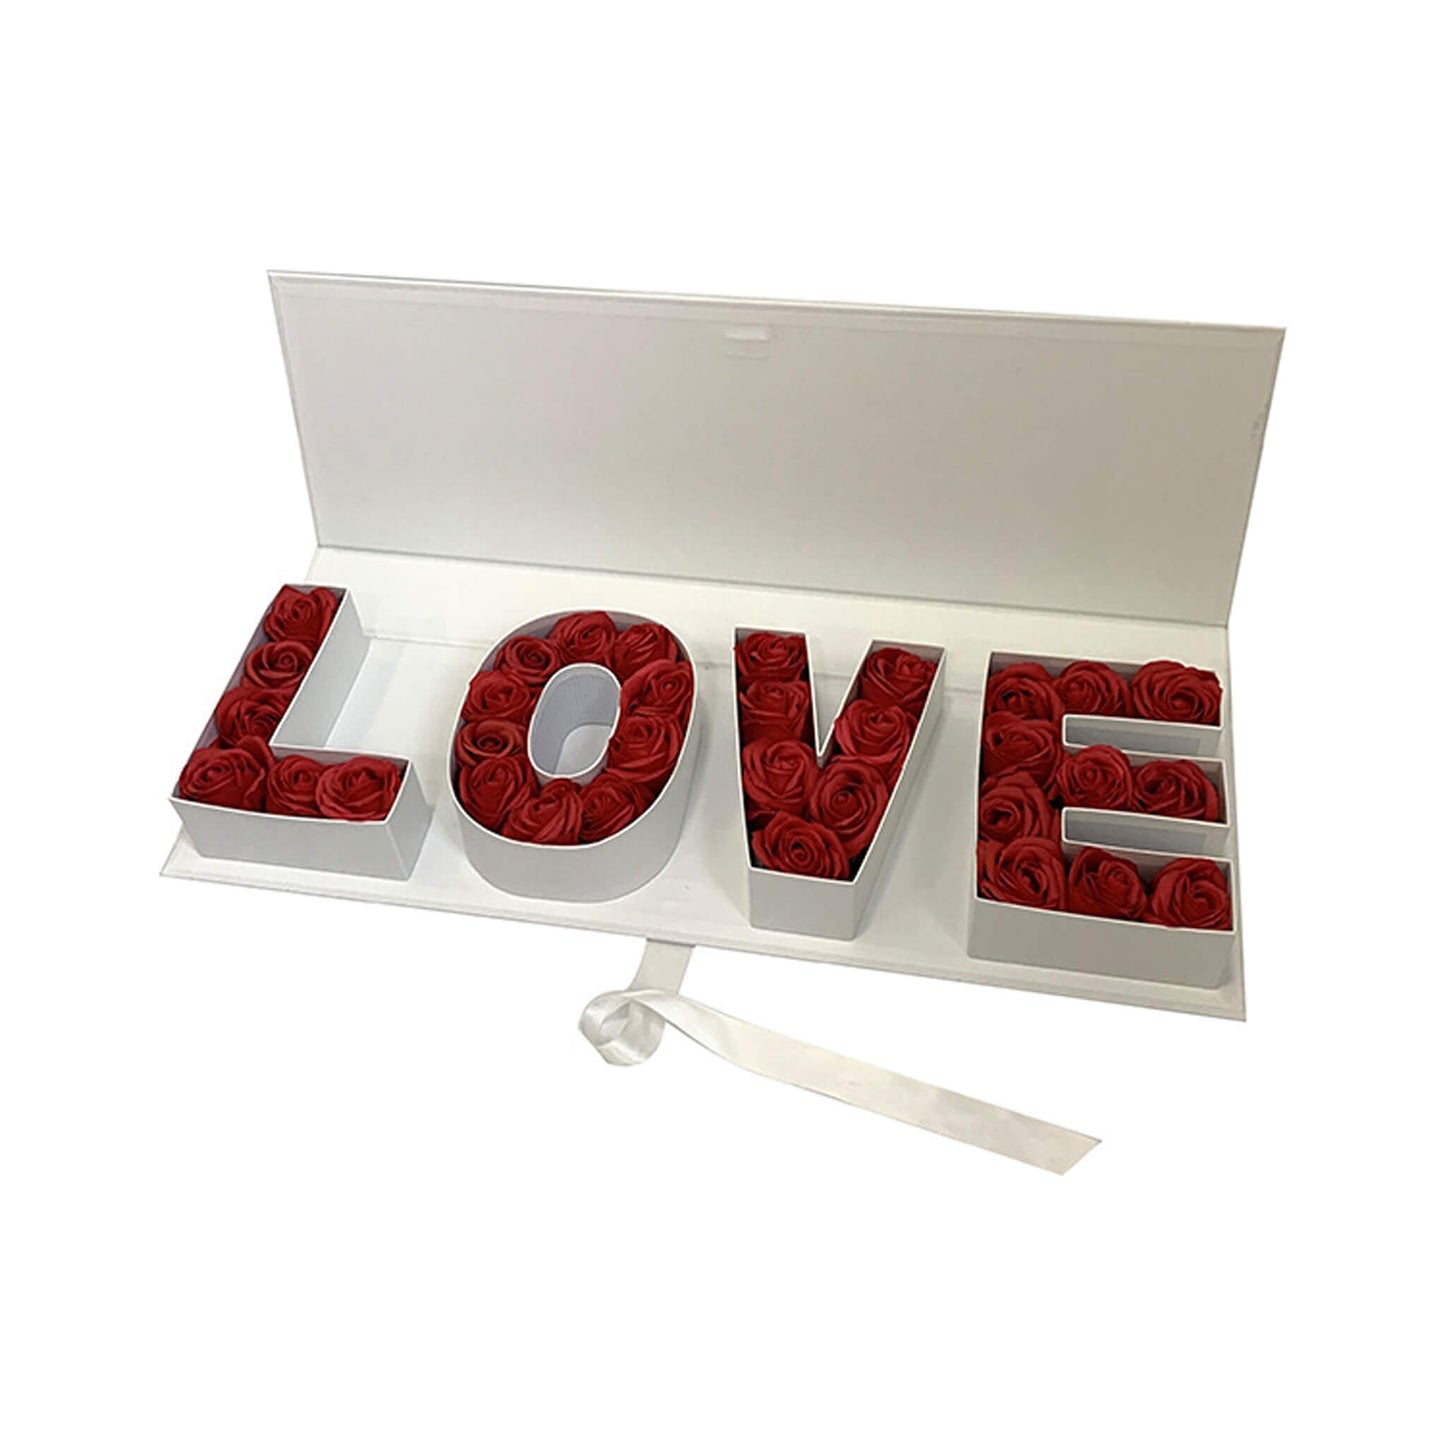 I love you rose gift box for Mother's day - Bulk Lots